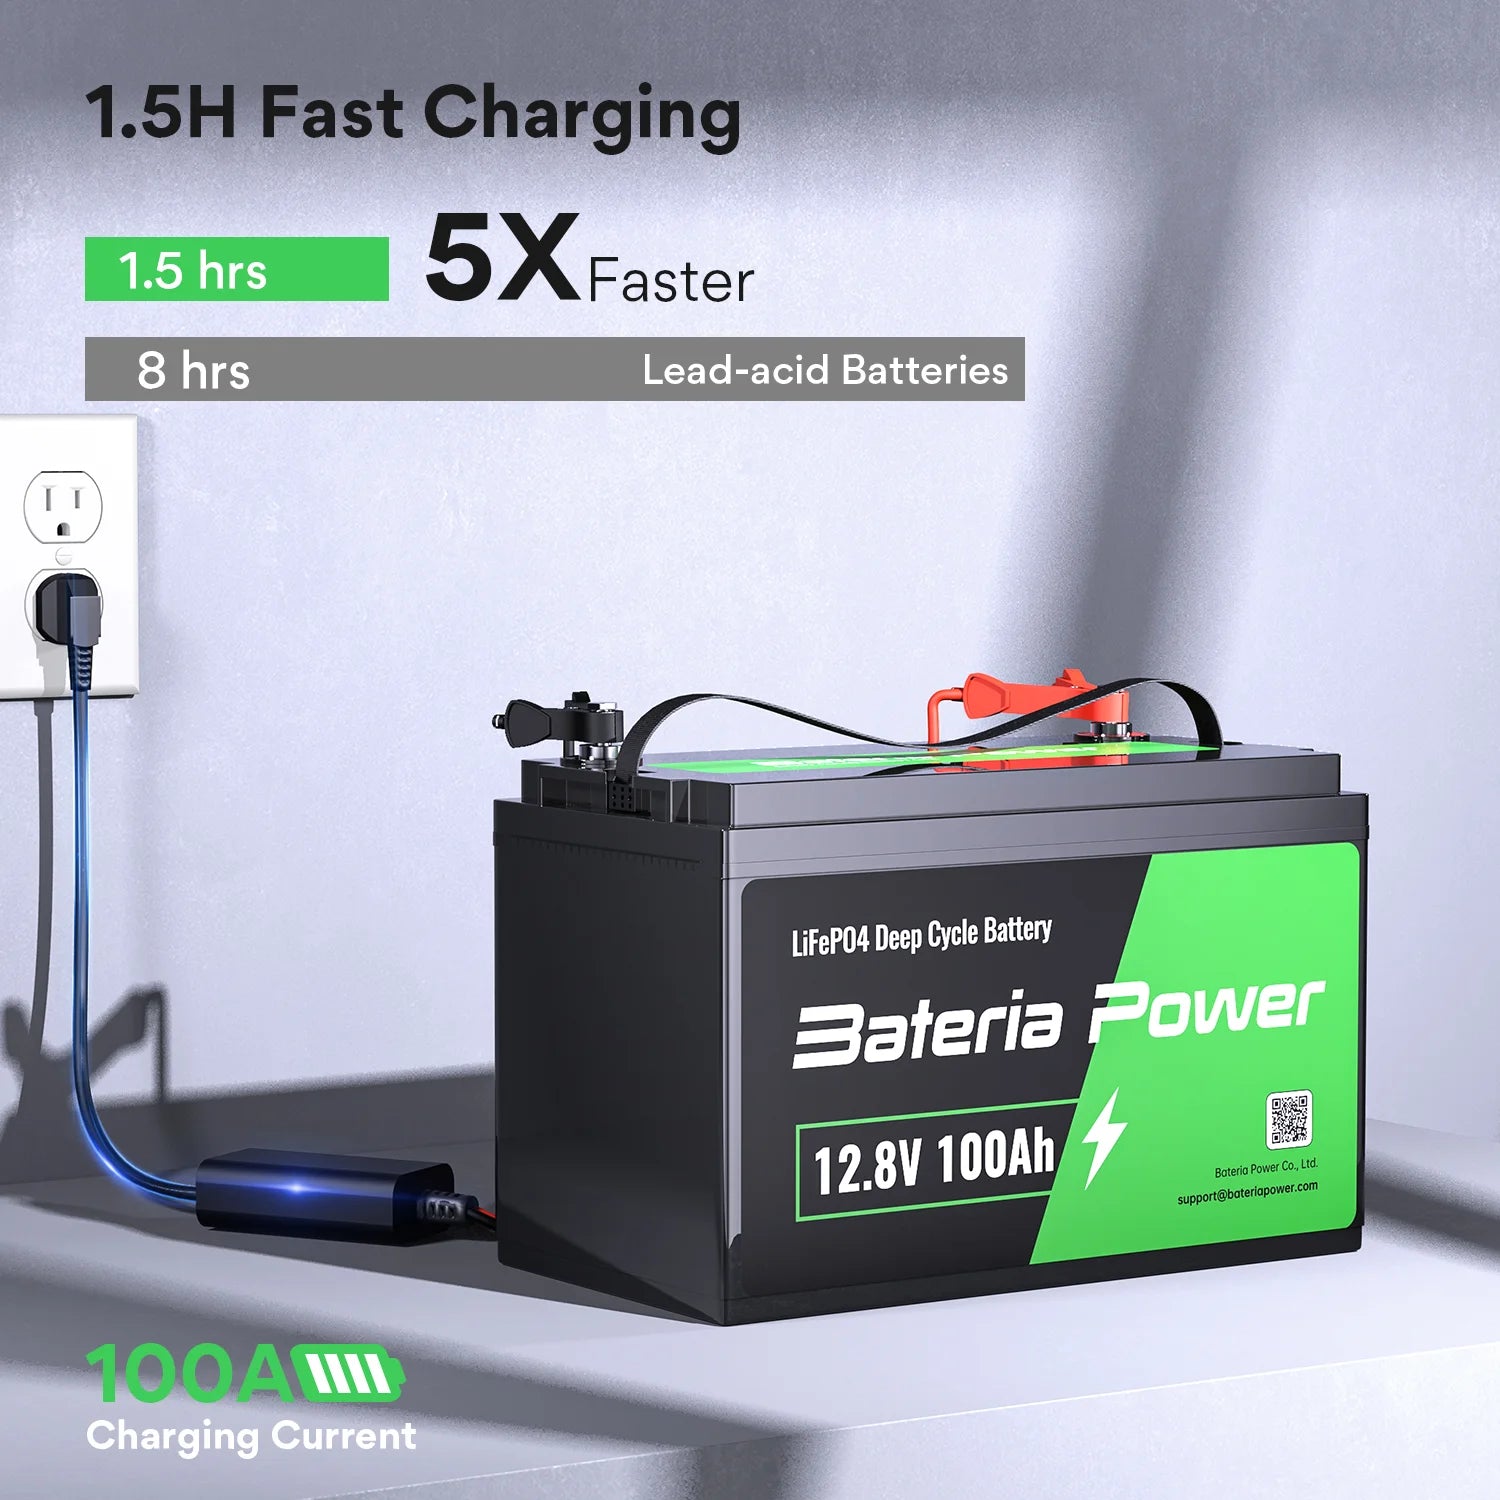 12v lithium battery Built-in100A BMS, Perfect for Replacing Most of Backup Power, Home Energy Storage and Off-Grid etc.